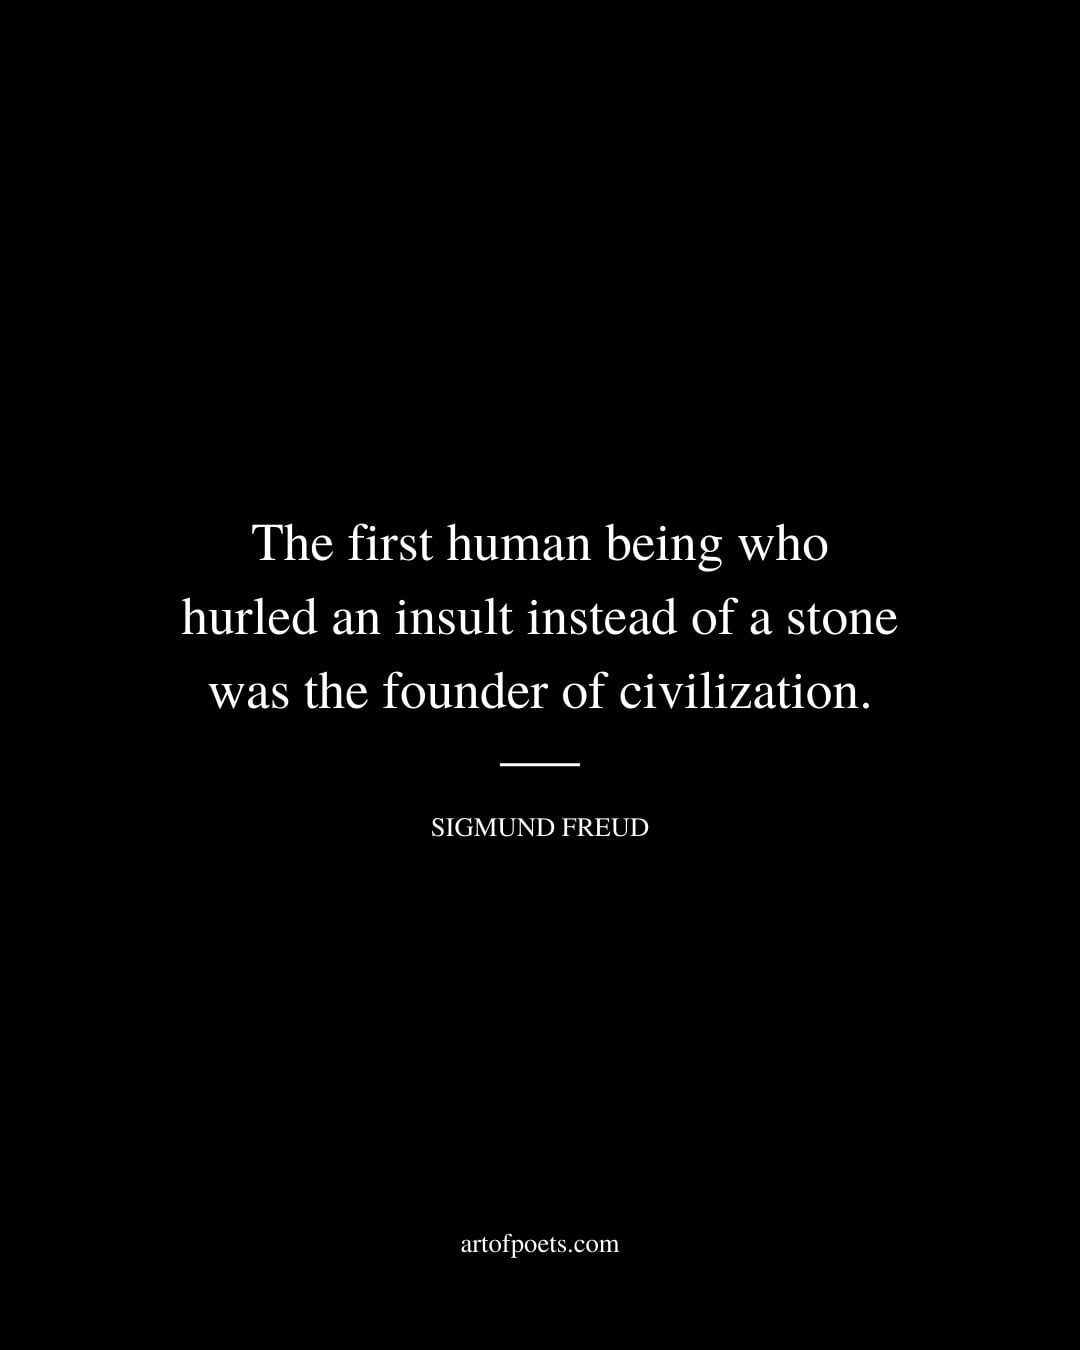 The first human being who hurled an insult instead of a stone was the founder of civilization